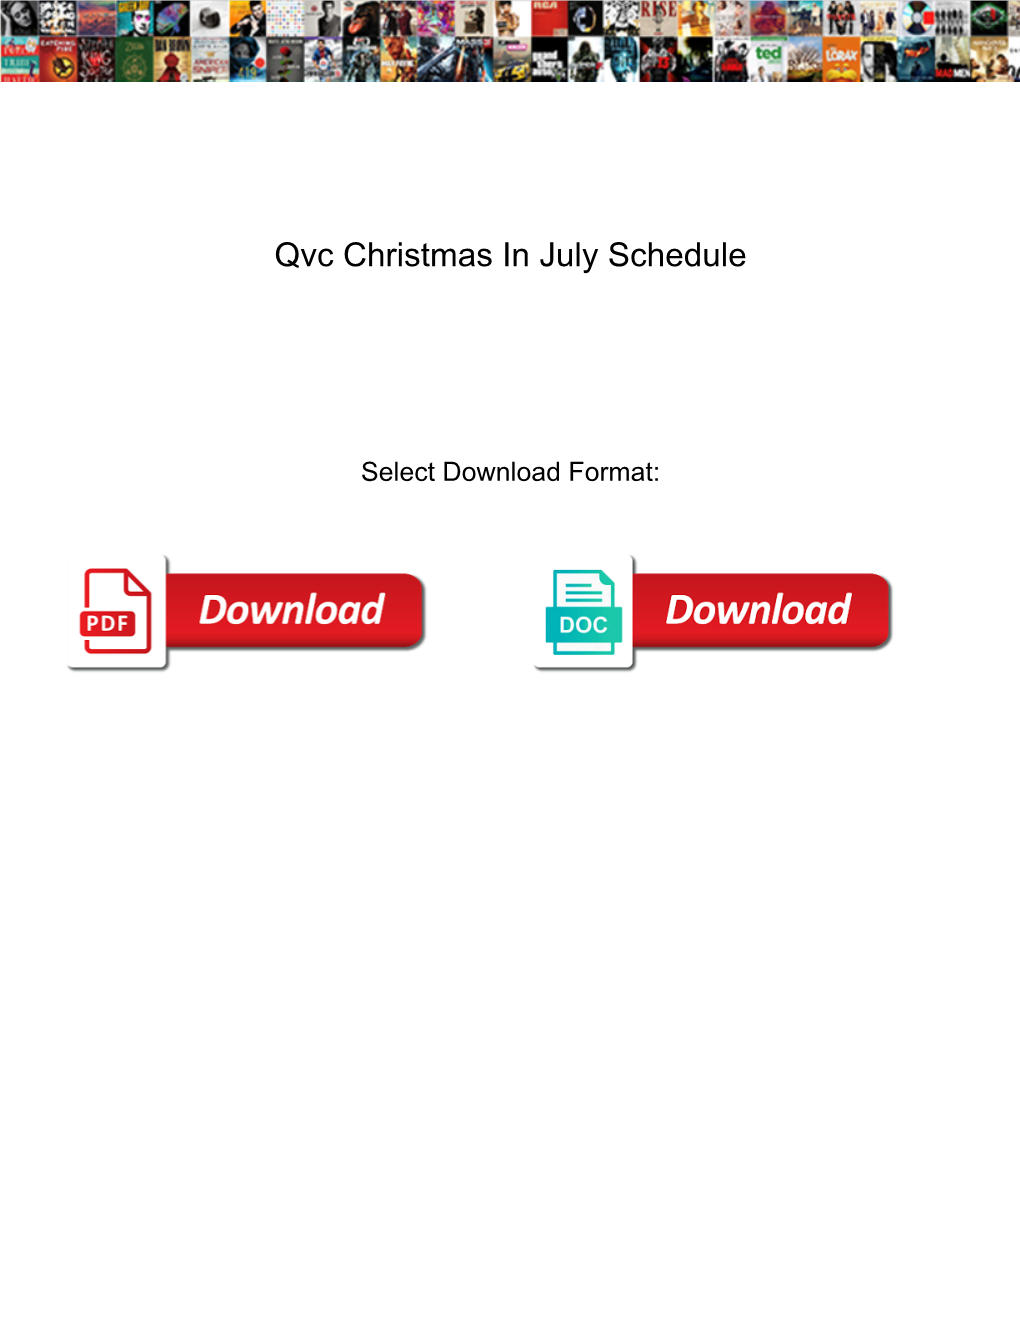 Qvc Christmas in July Schedule